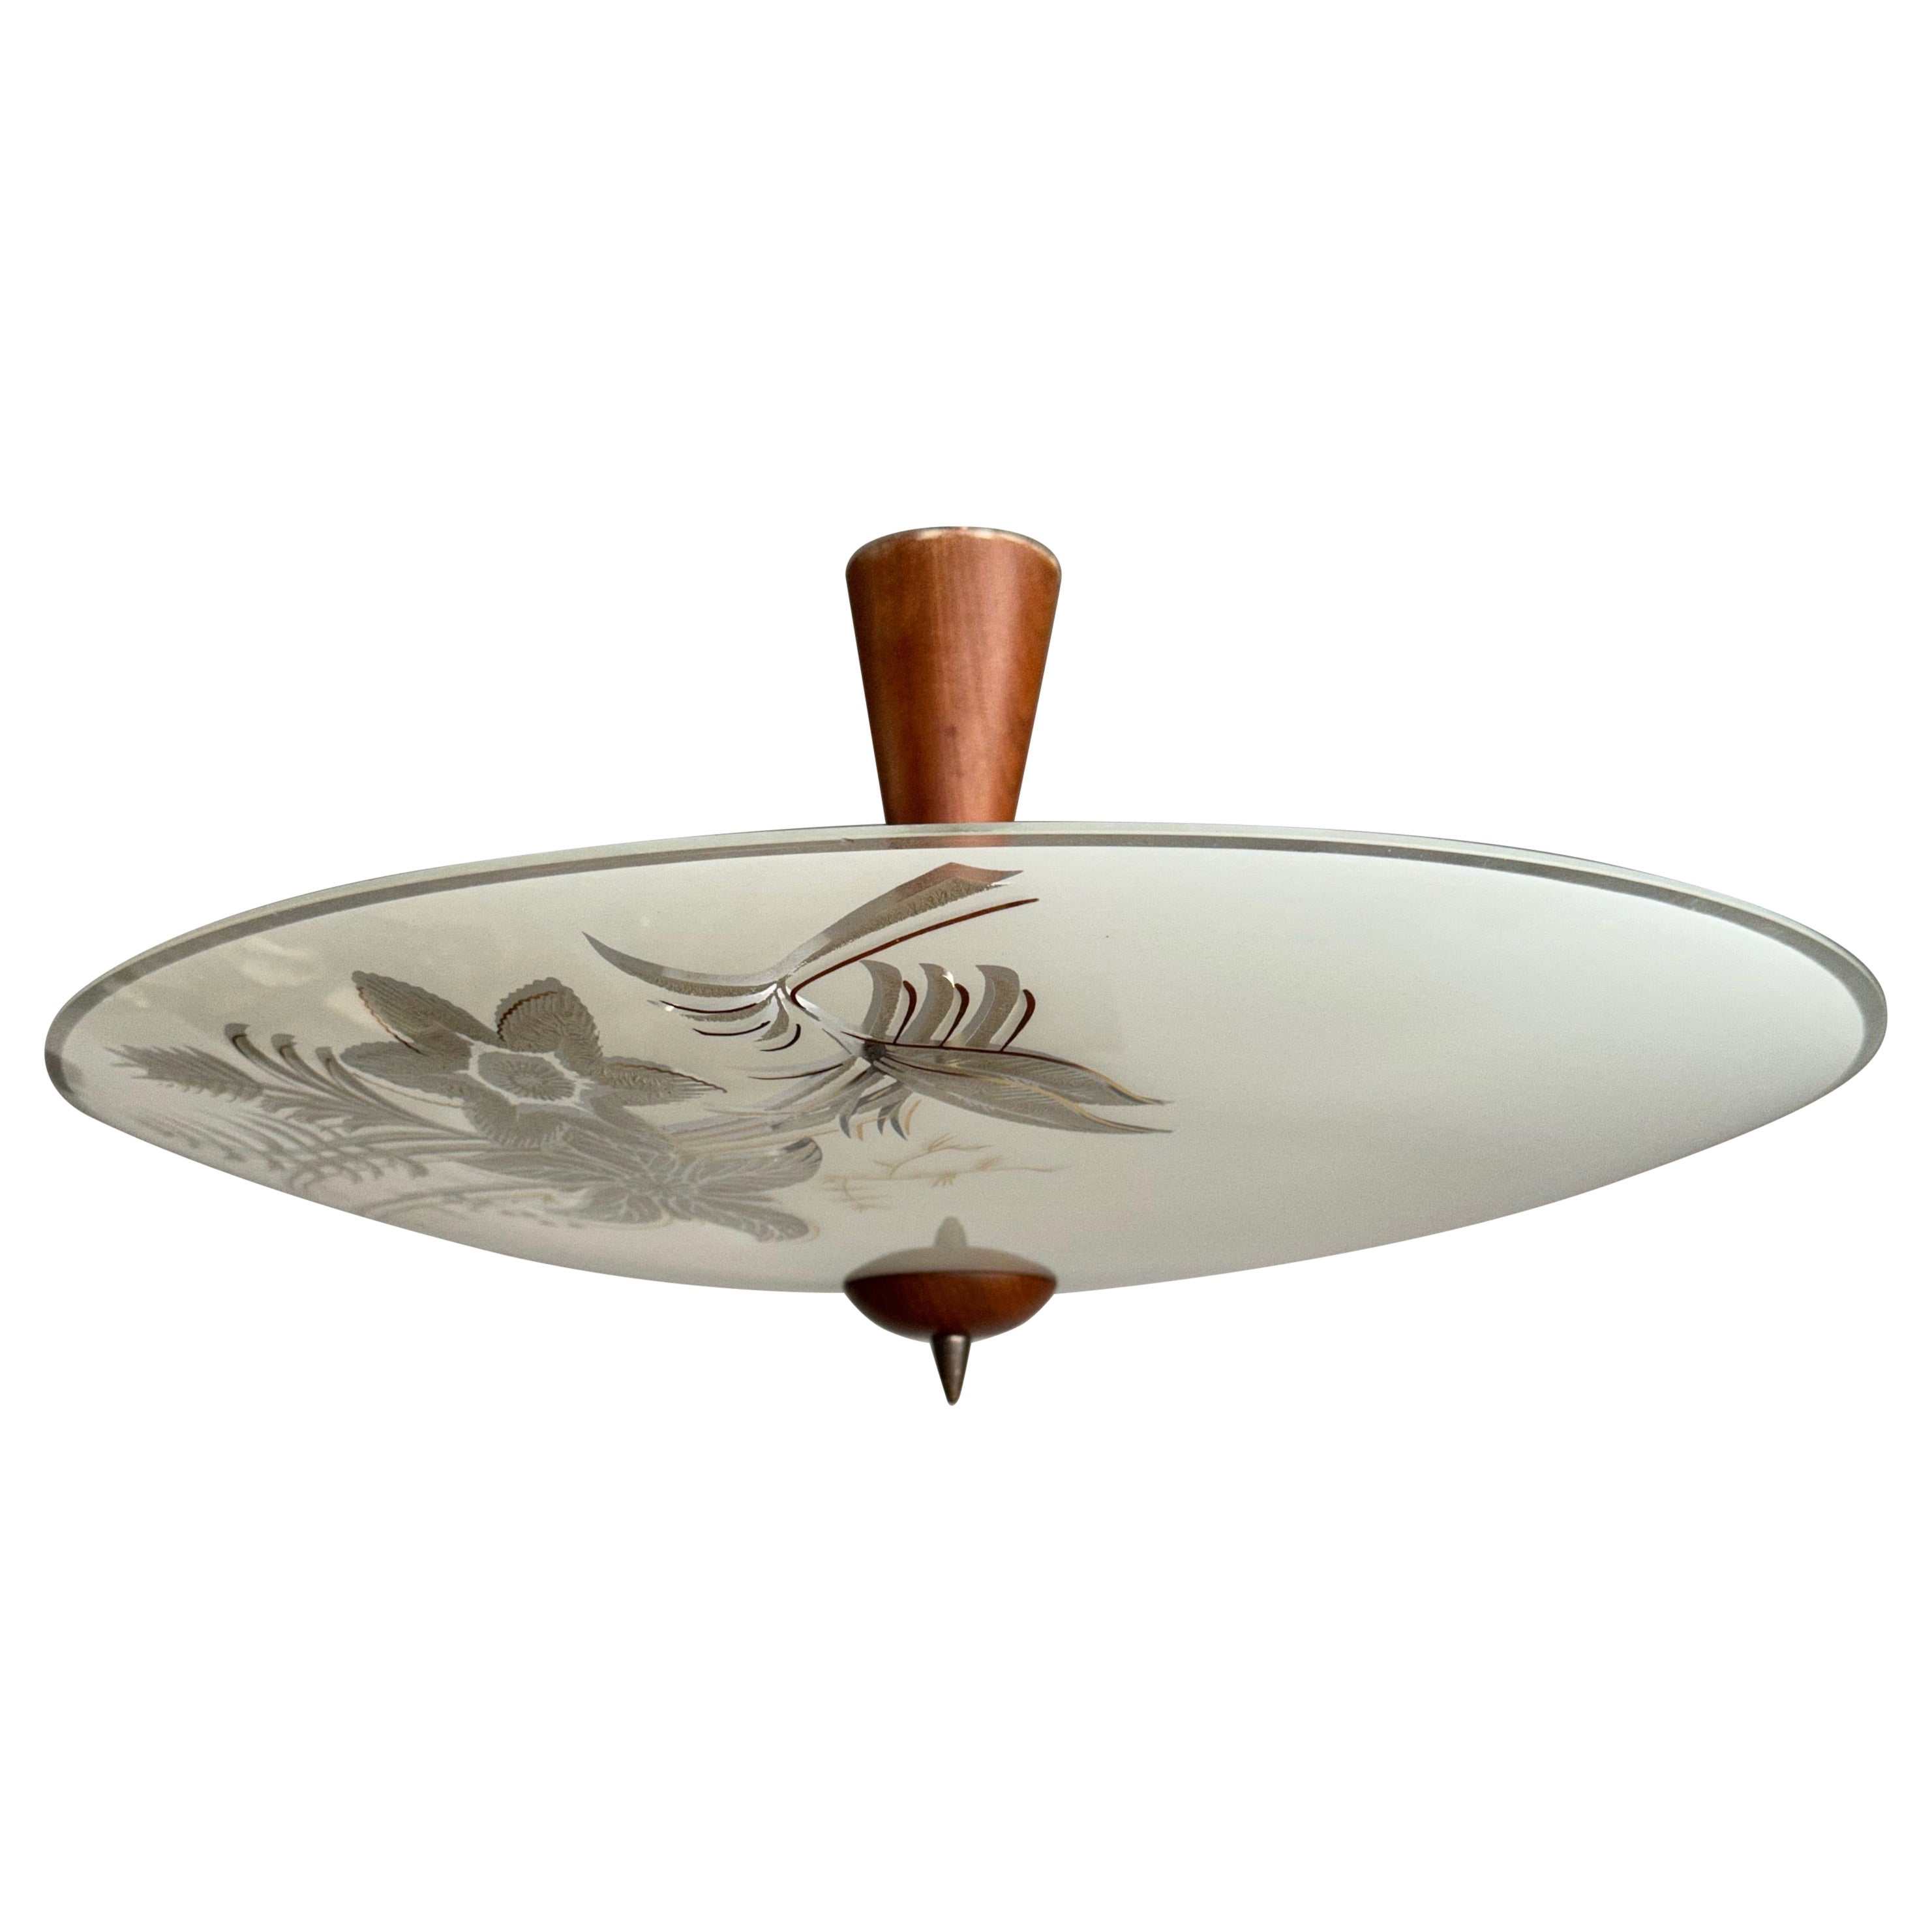 Midcentury Modern Round Shape Glass Flush Mount / Ceiling Fixture with Teak Wood For Sale